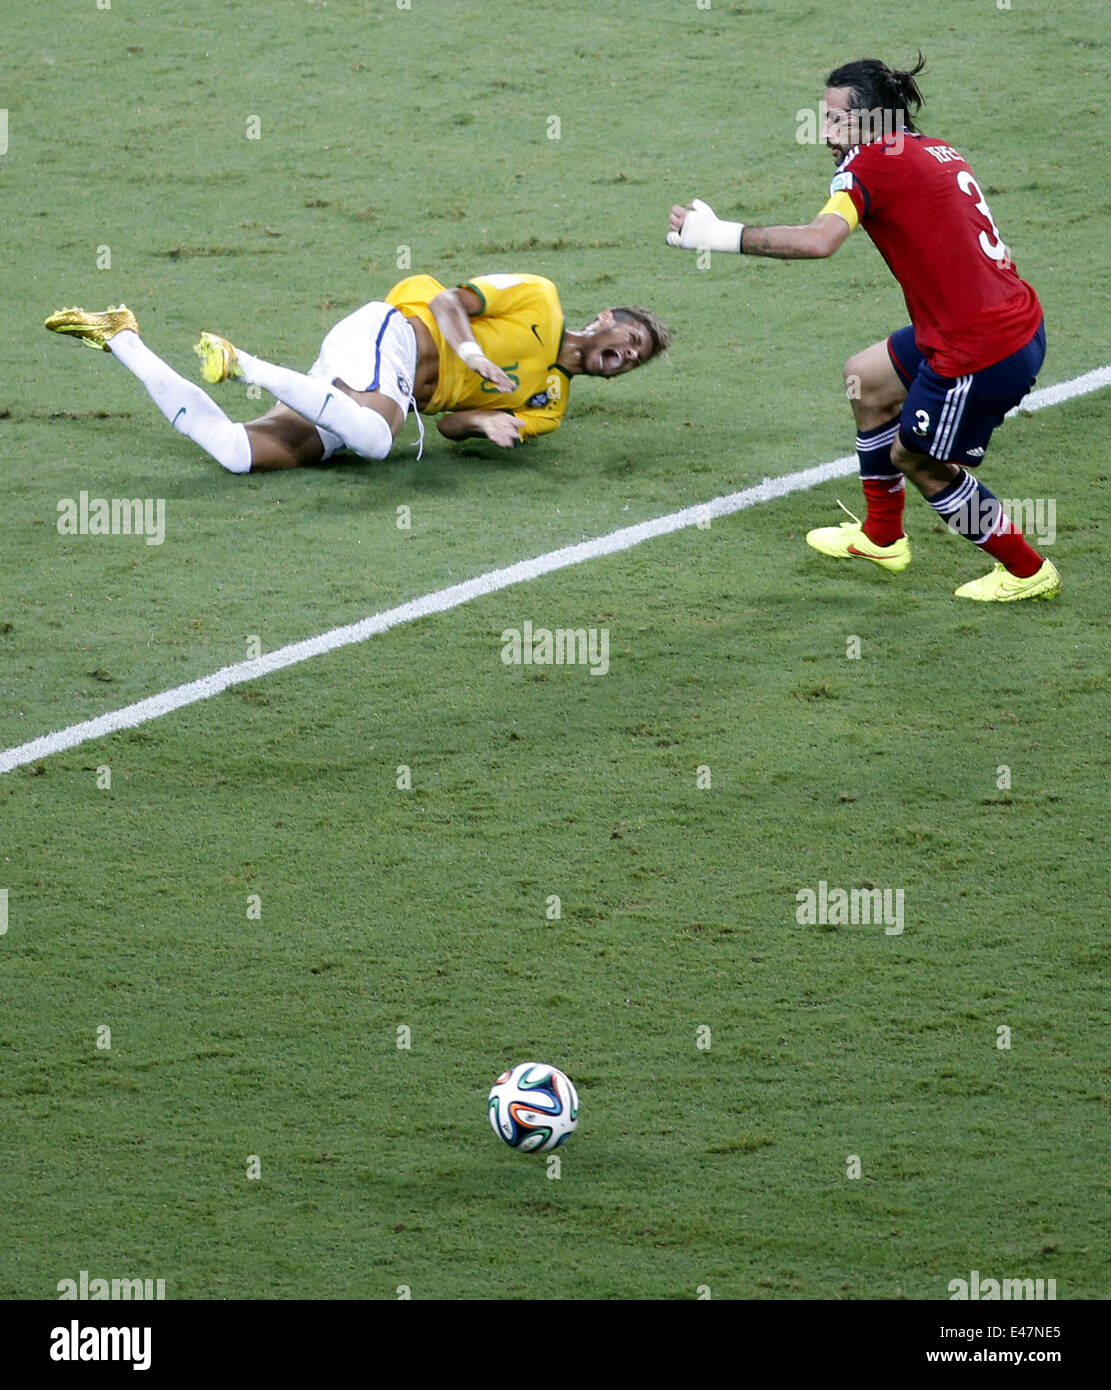 Fortaleza, Brazil. 4th July, 2014. Brazil's Neymar (L) falls down during a quarter-finals match between Brazil and Colombia of 2014 FIFA World Cup at the Estadio Castelao Stadium in Fortaleza, Brazil, on July 4, 2014. Brazil won 2-1 over Colombia and qualified for semi-finals on Friday. Credit:  Liao Yujie/Xinhua/Alamy Live News Stock Photo